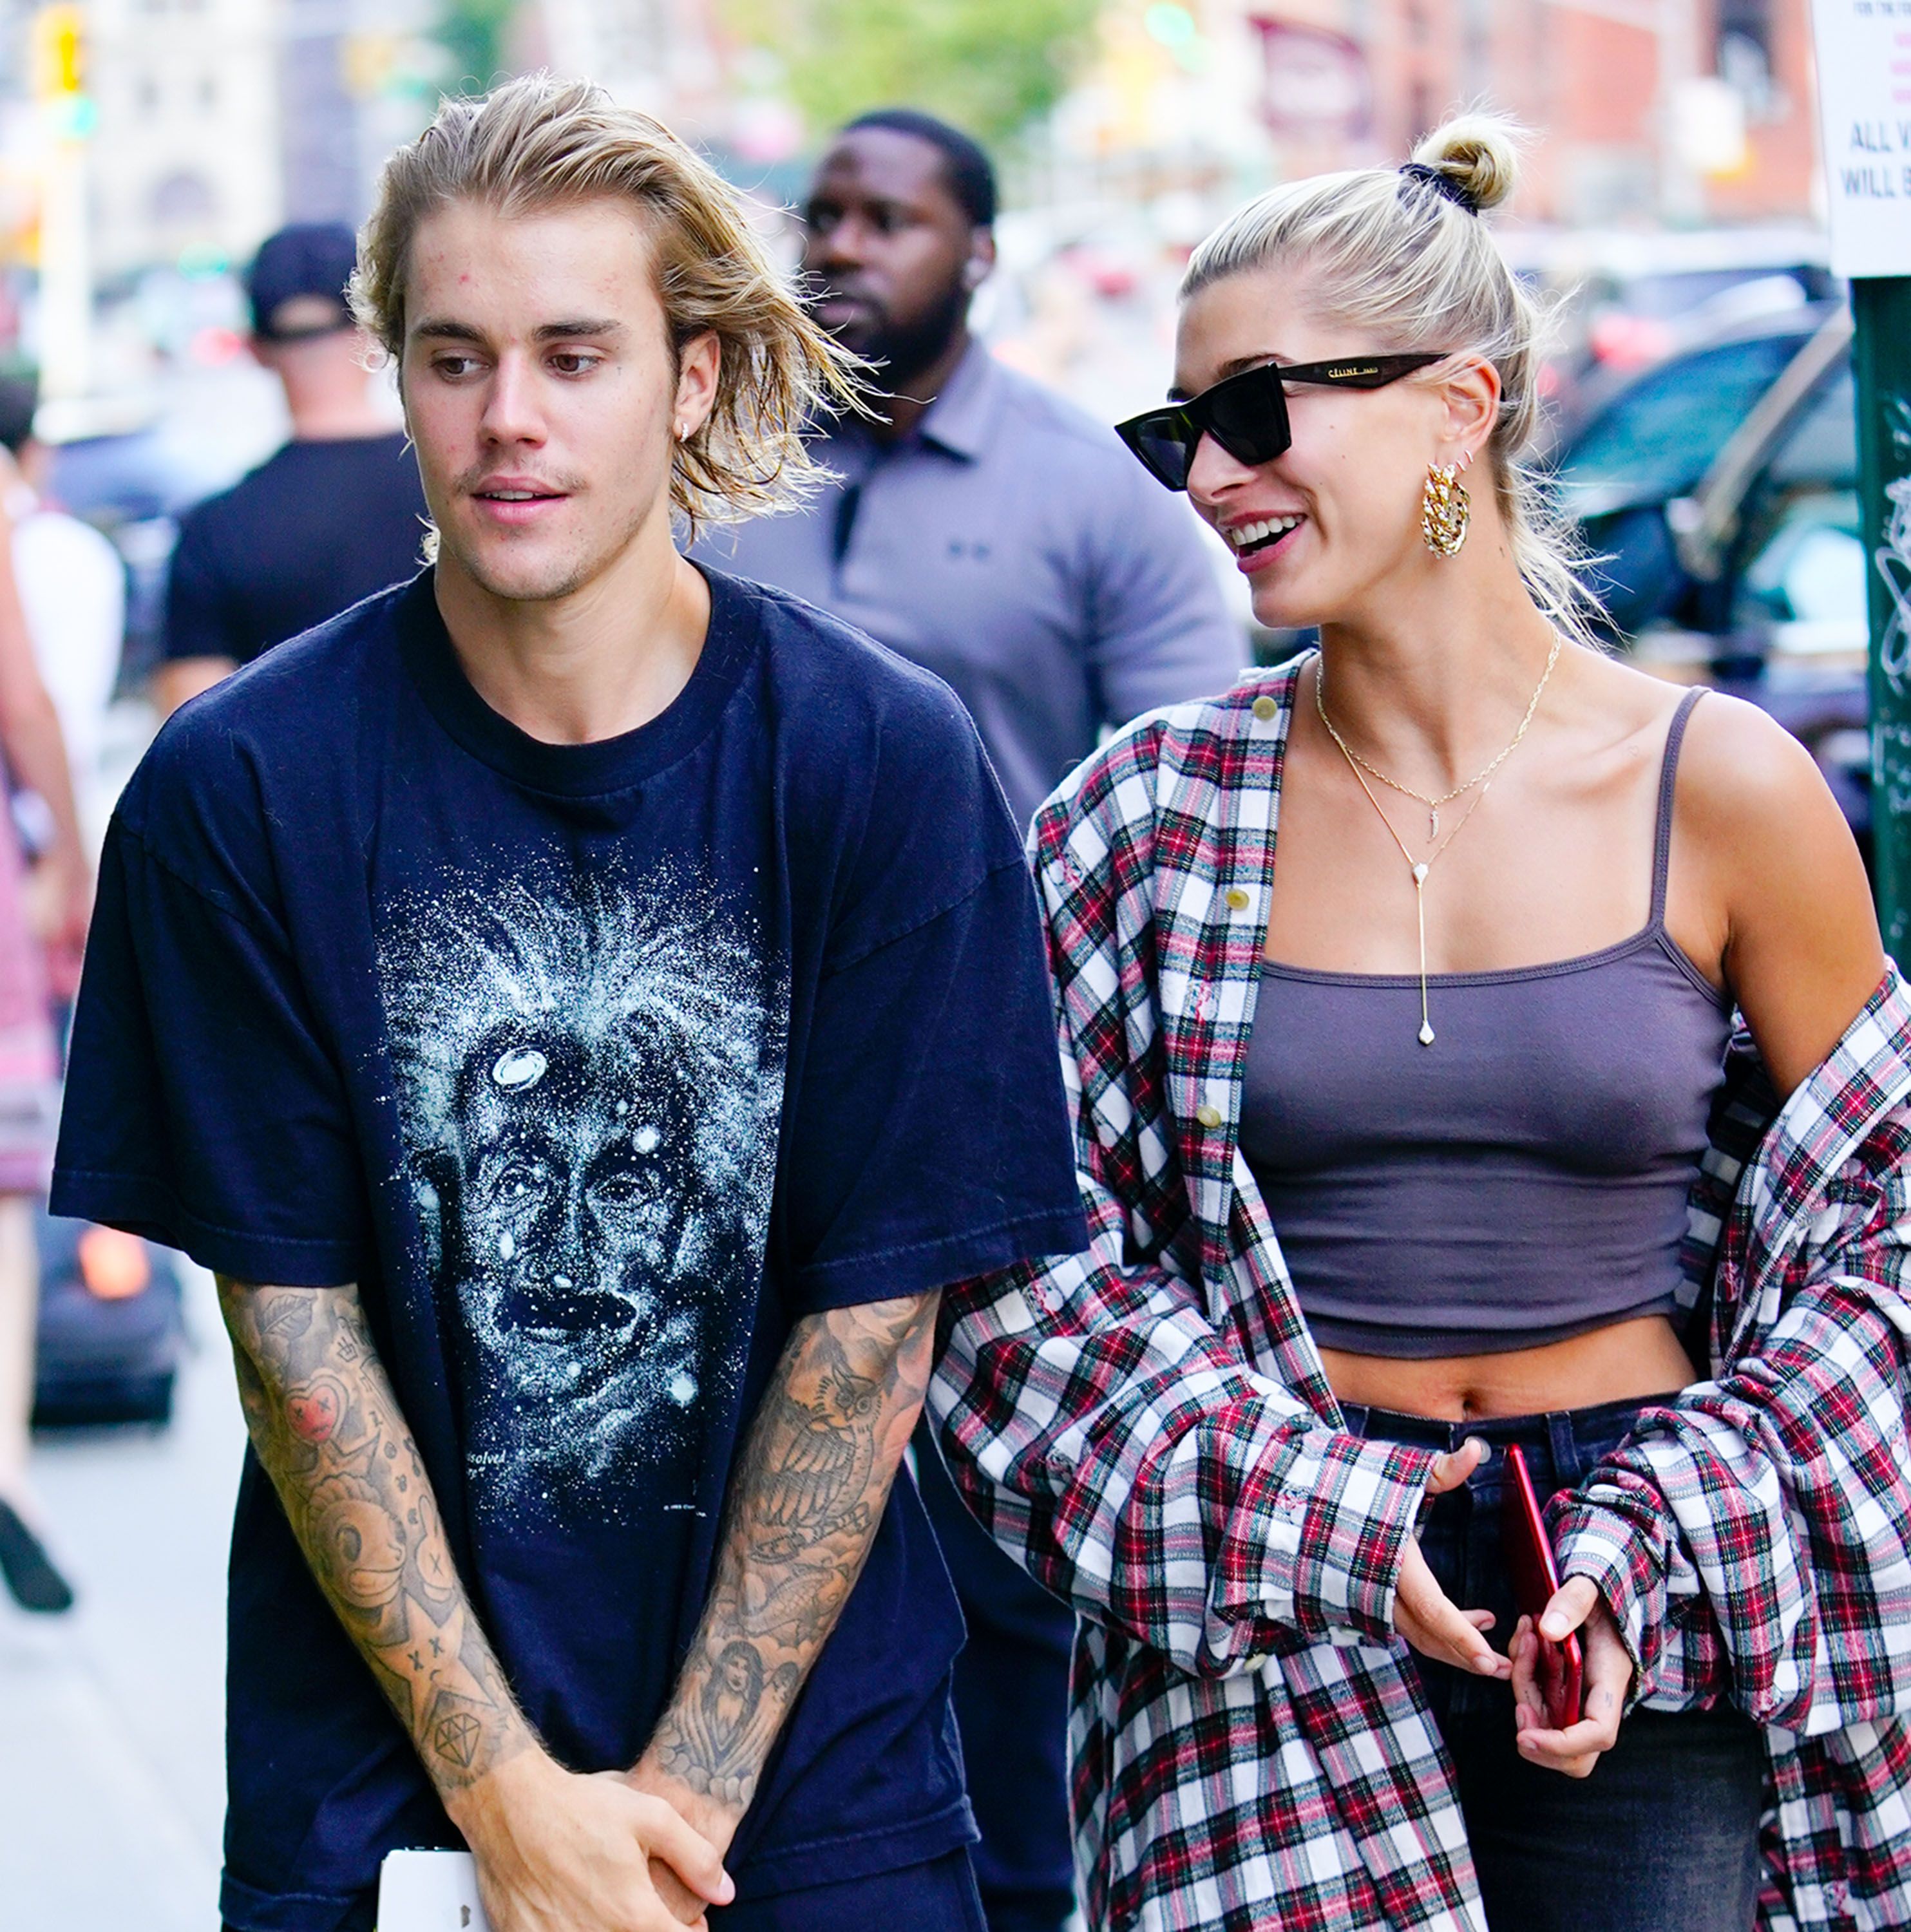 justin-bieber-and-hailey-baldwin-are-seen-on-august-8-2018-news-photo-1013560900-1547914162.jpg